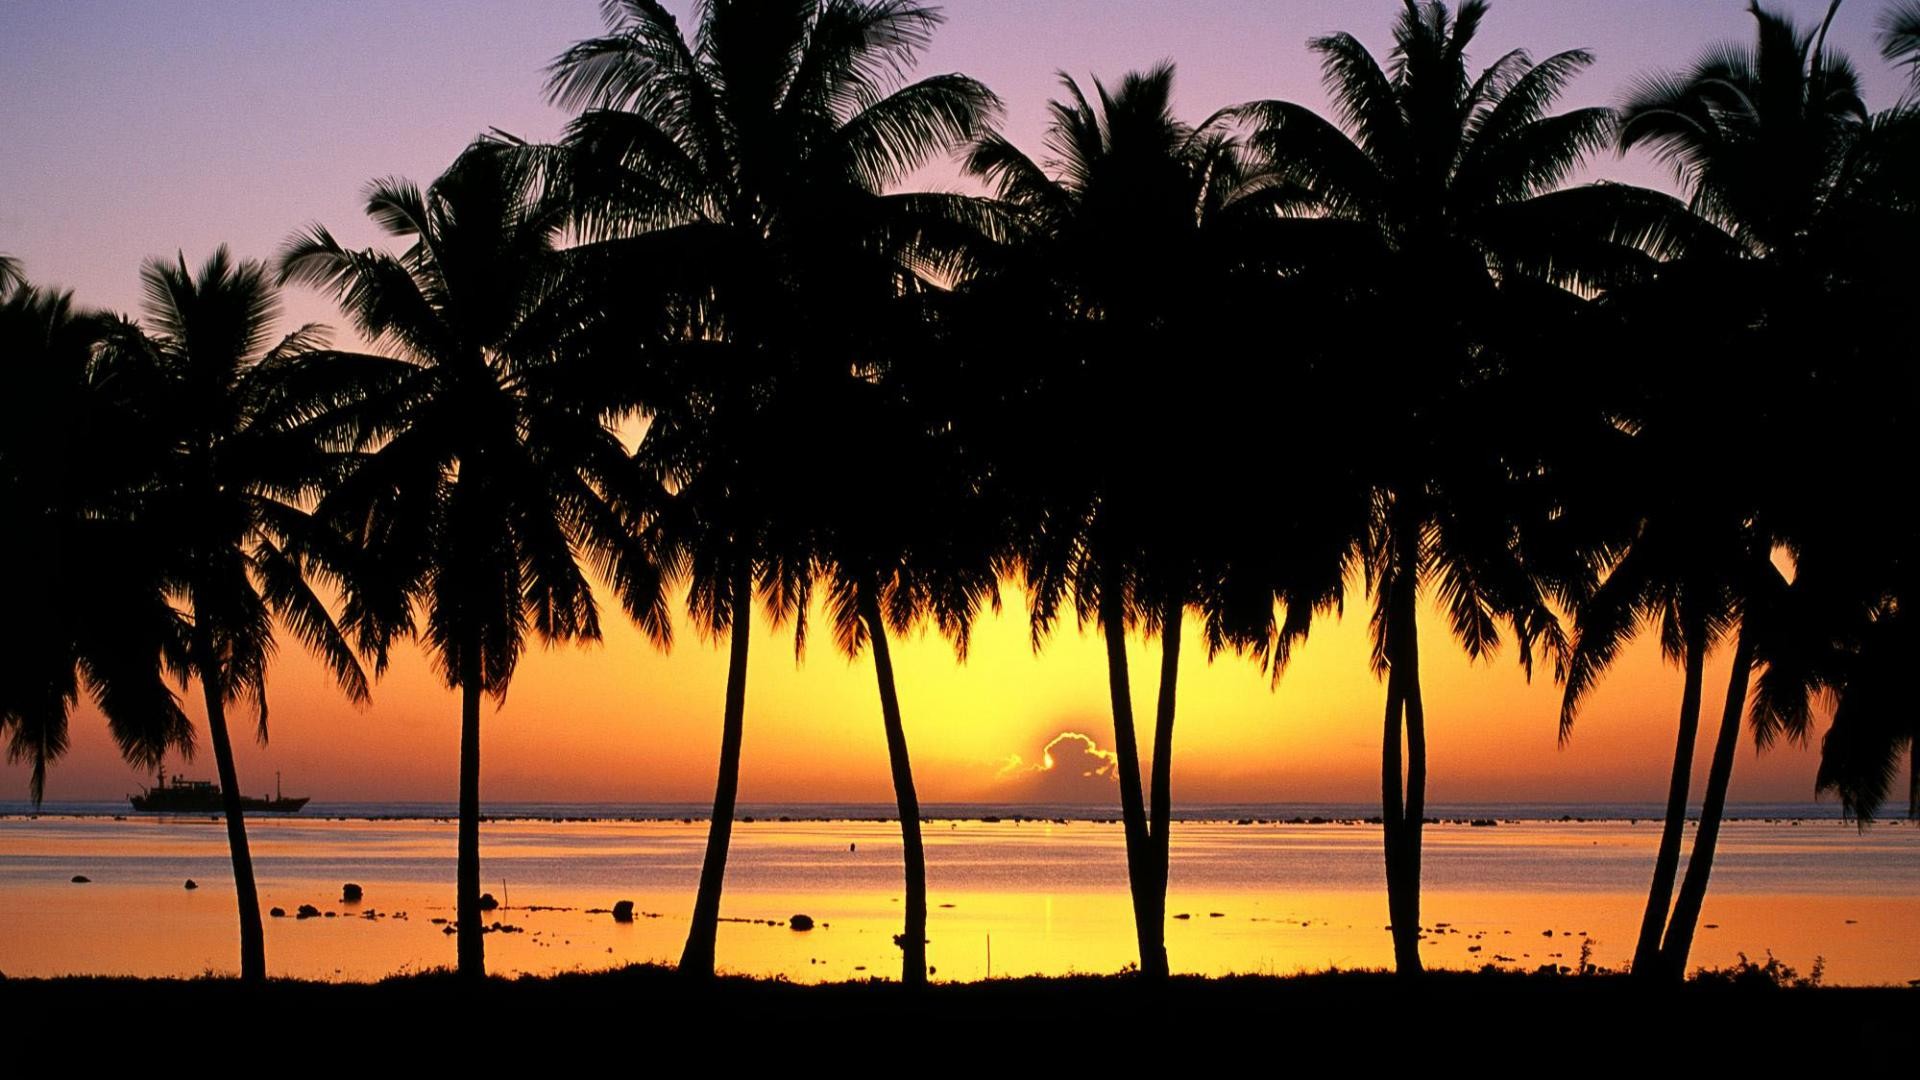 1920x1080 Palm Tree Desktop Wallpaper - HD Wallpapers Backgrounds of Your Choice